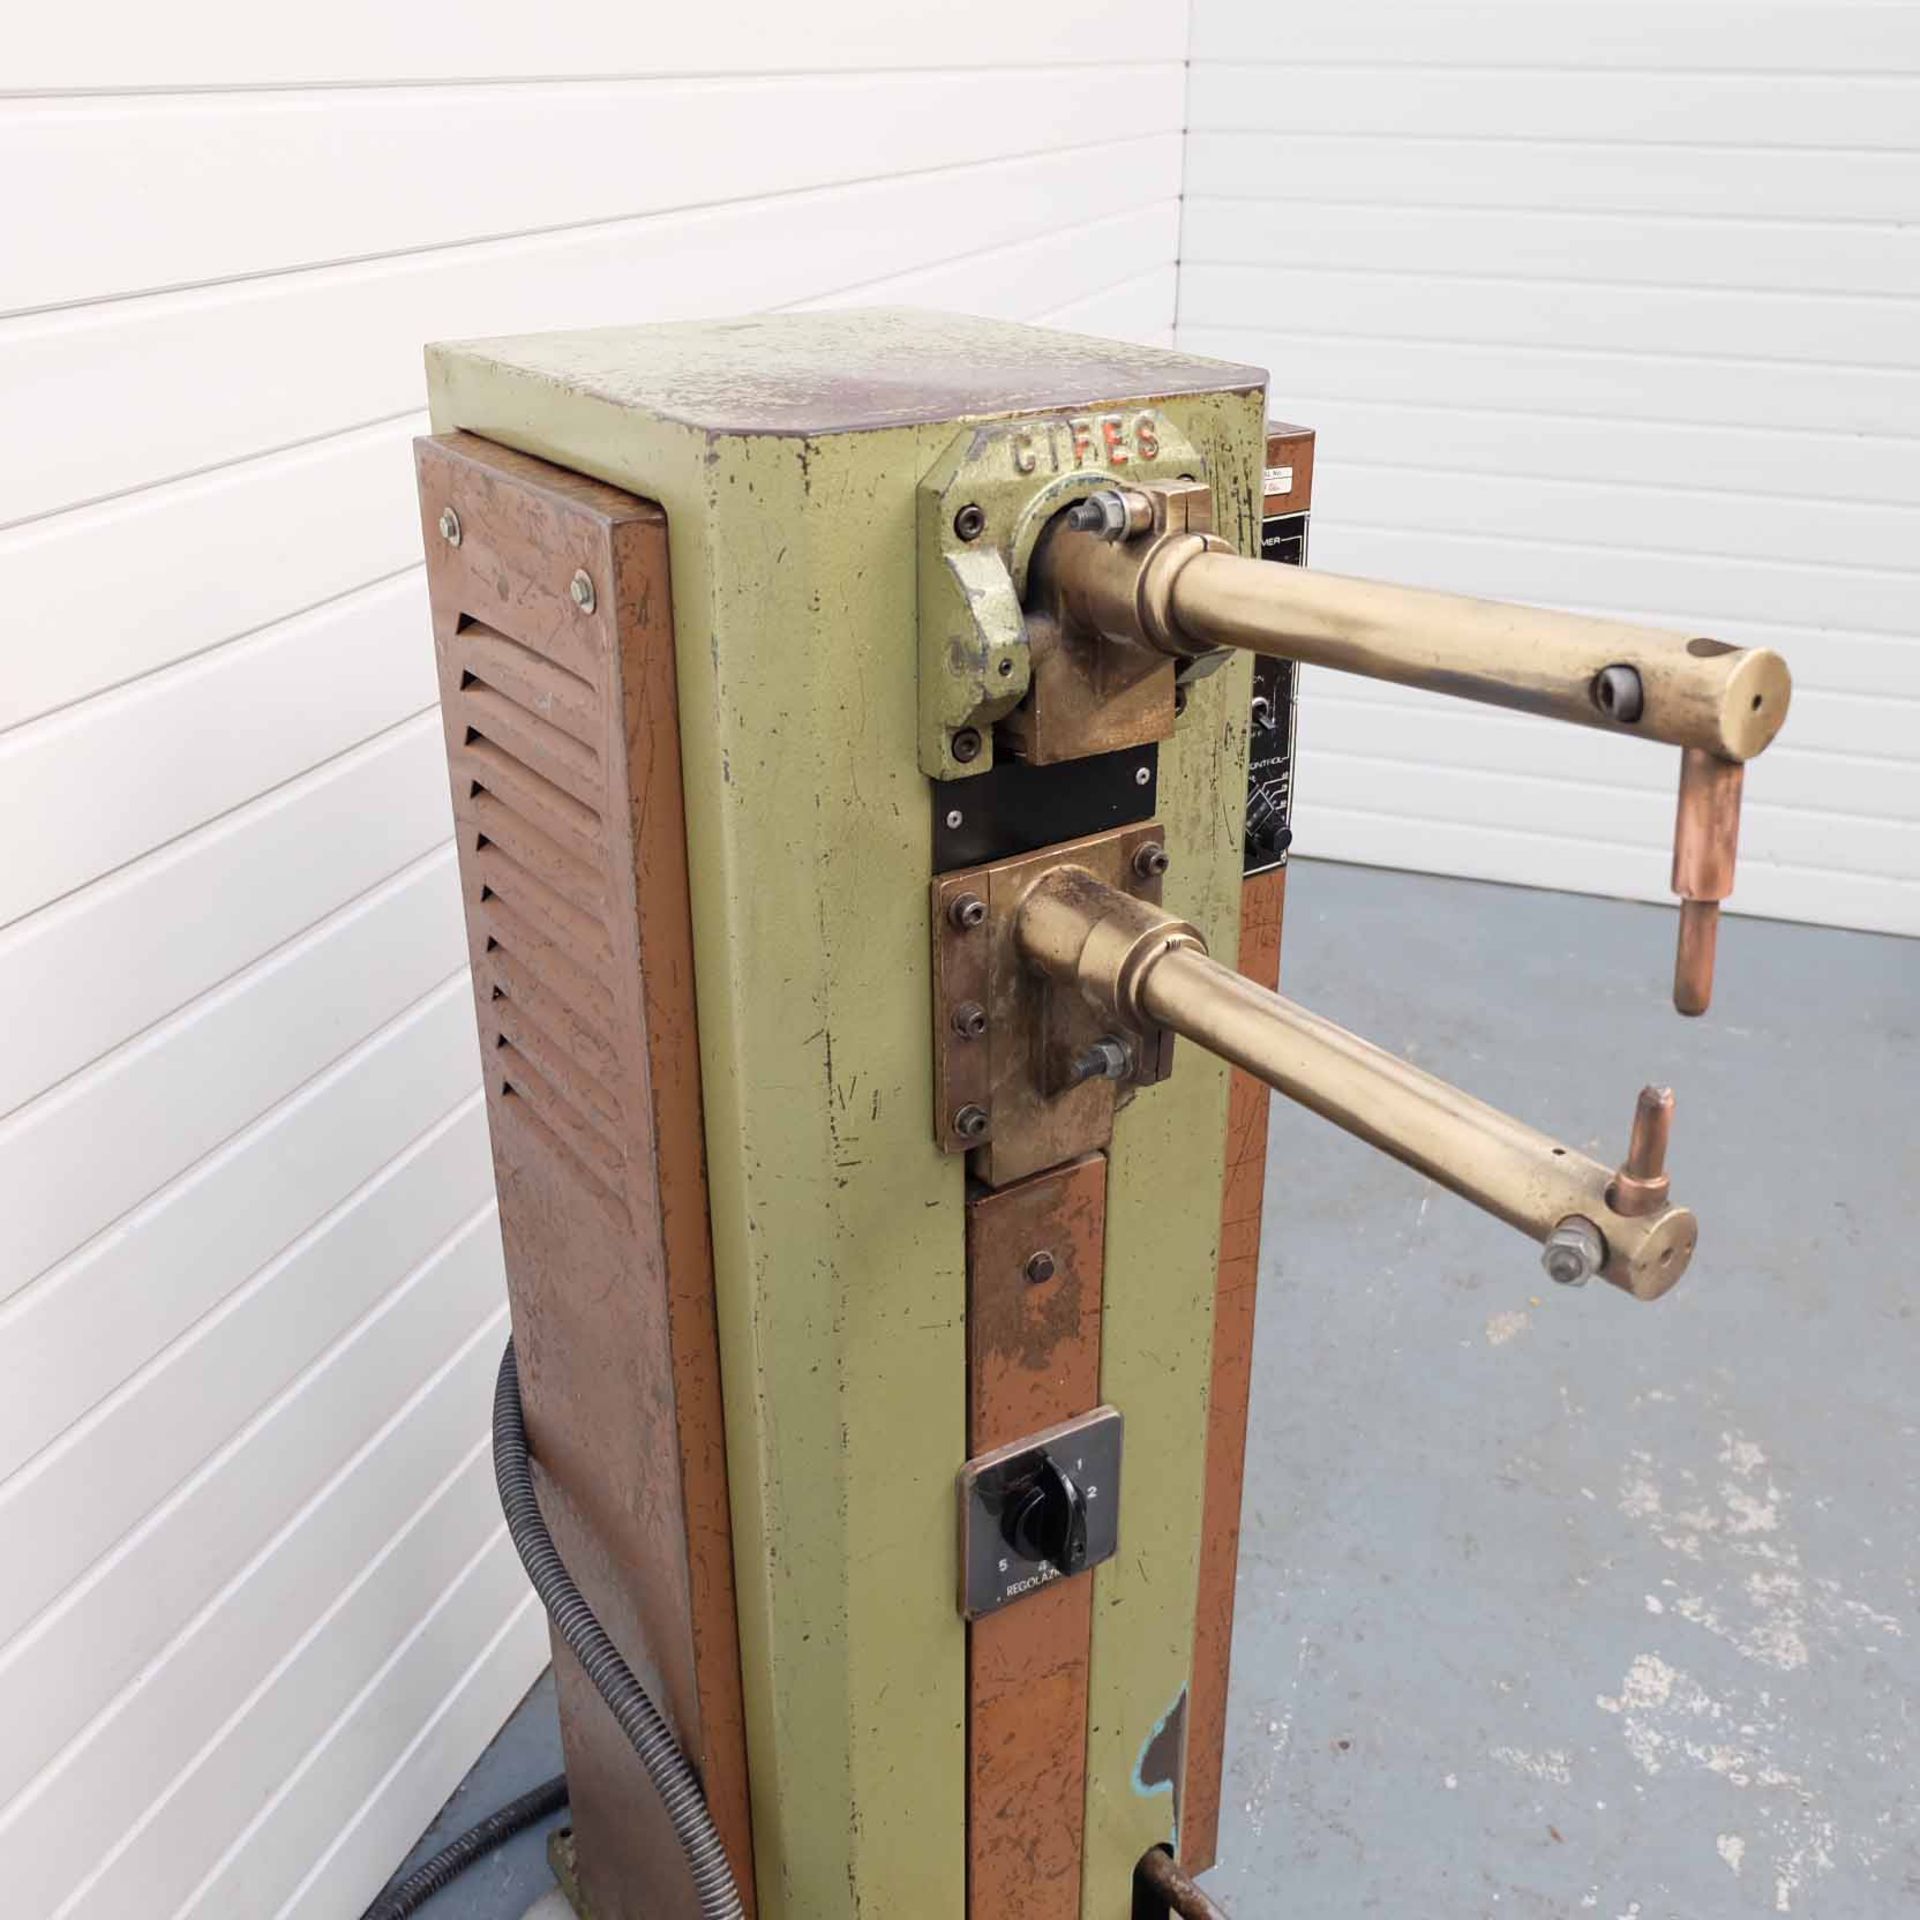 Cifes Spot Welding Machine. Capacity Unknown. Throat Depth 350mm. 5 Settings & Time Control. - Image 3 of 7